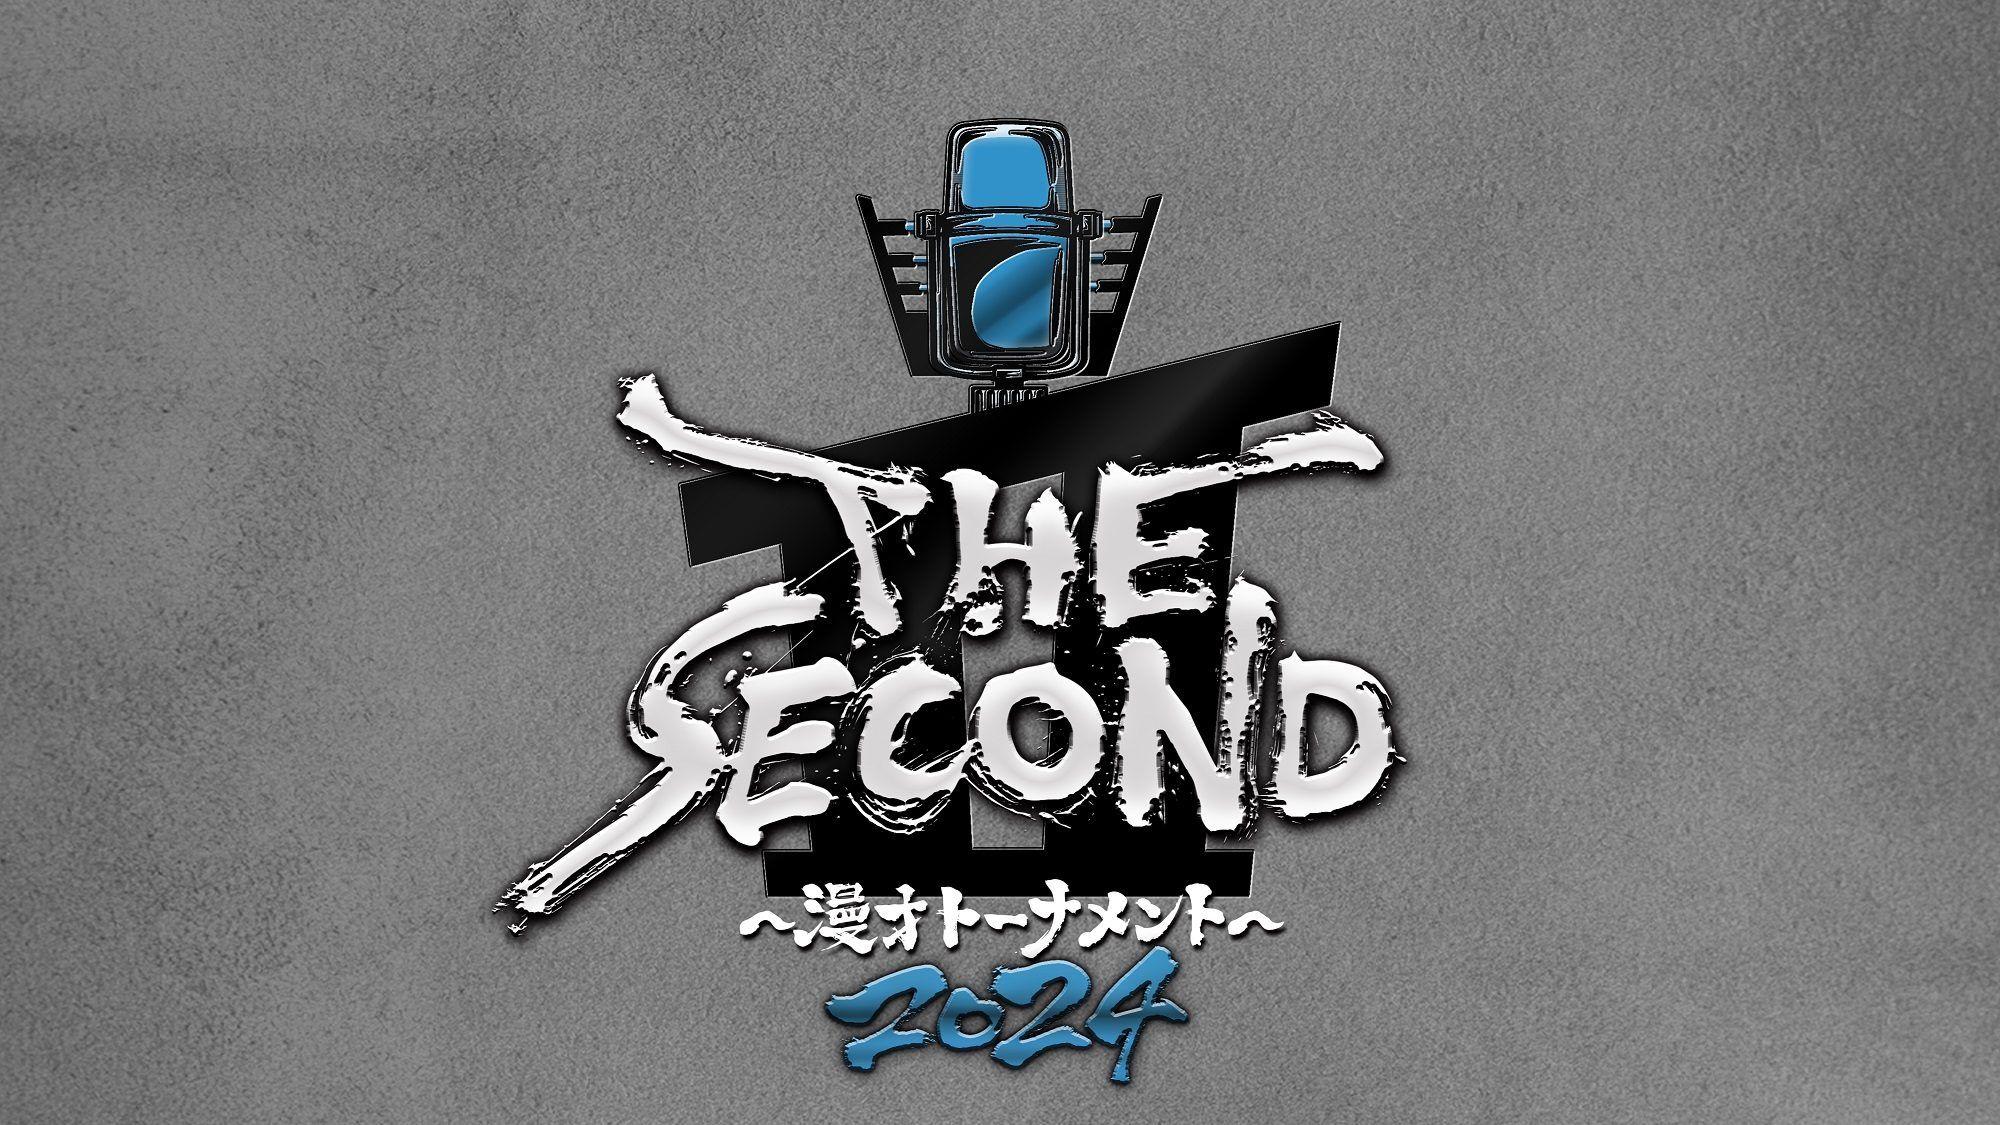 『THE SECOND～漫才トーナメント～』第2回大会の開催が決定！_site_large